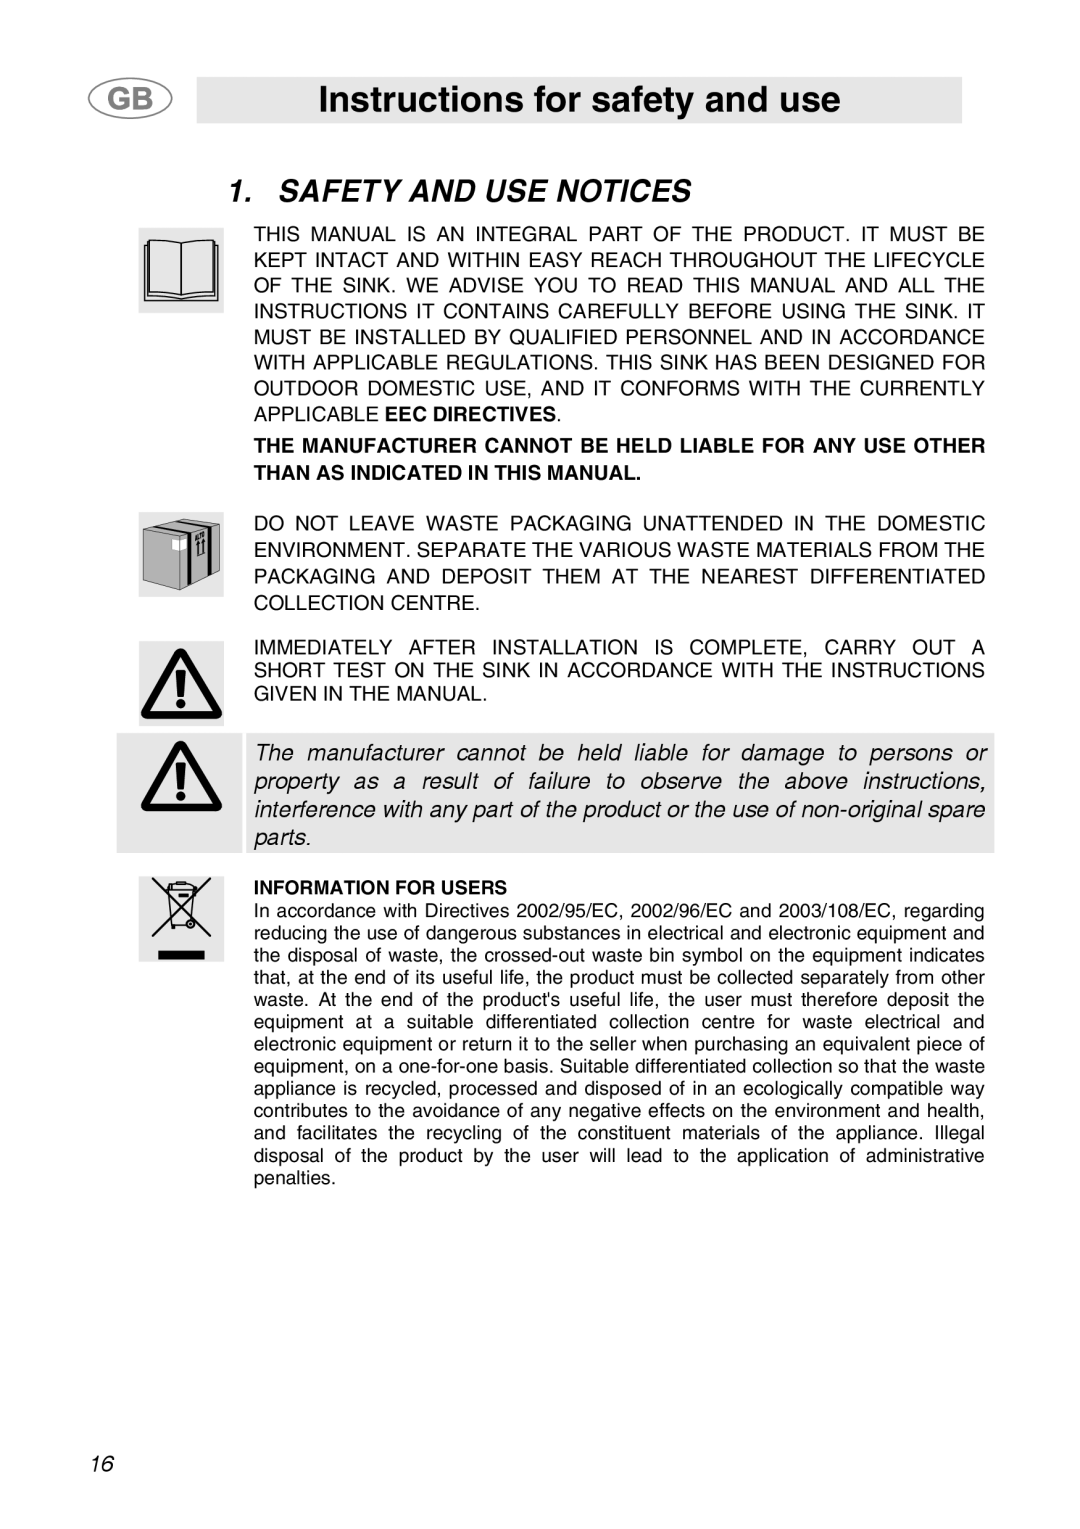 Smeg ML60 manual Instructions for safety and use, Safety And Use Notices 